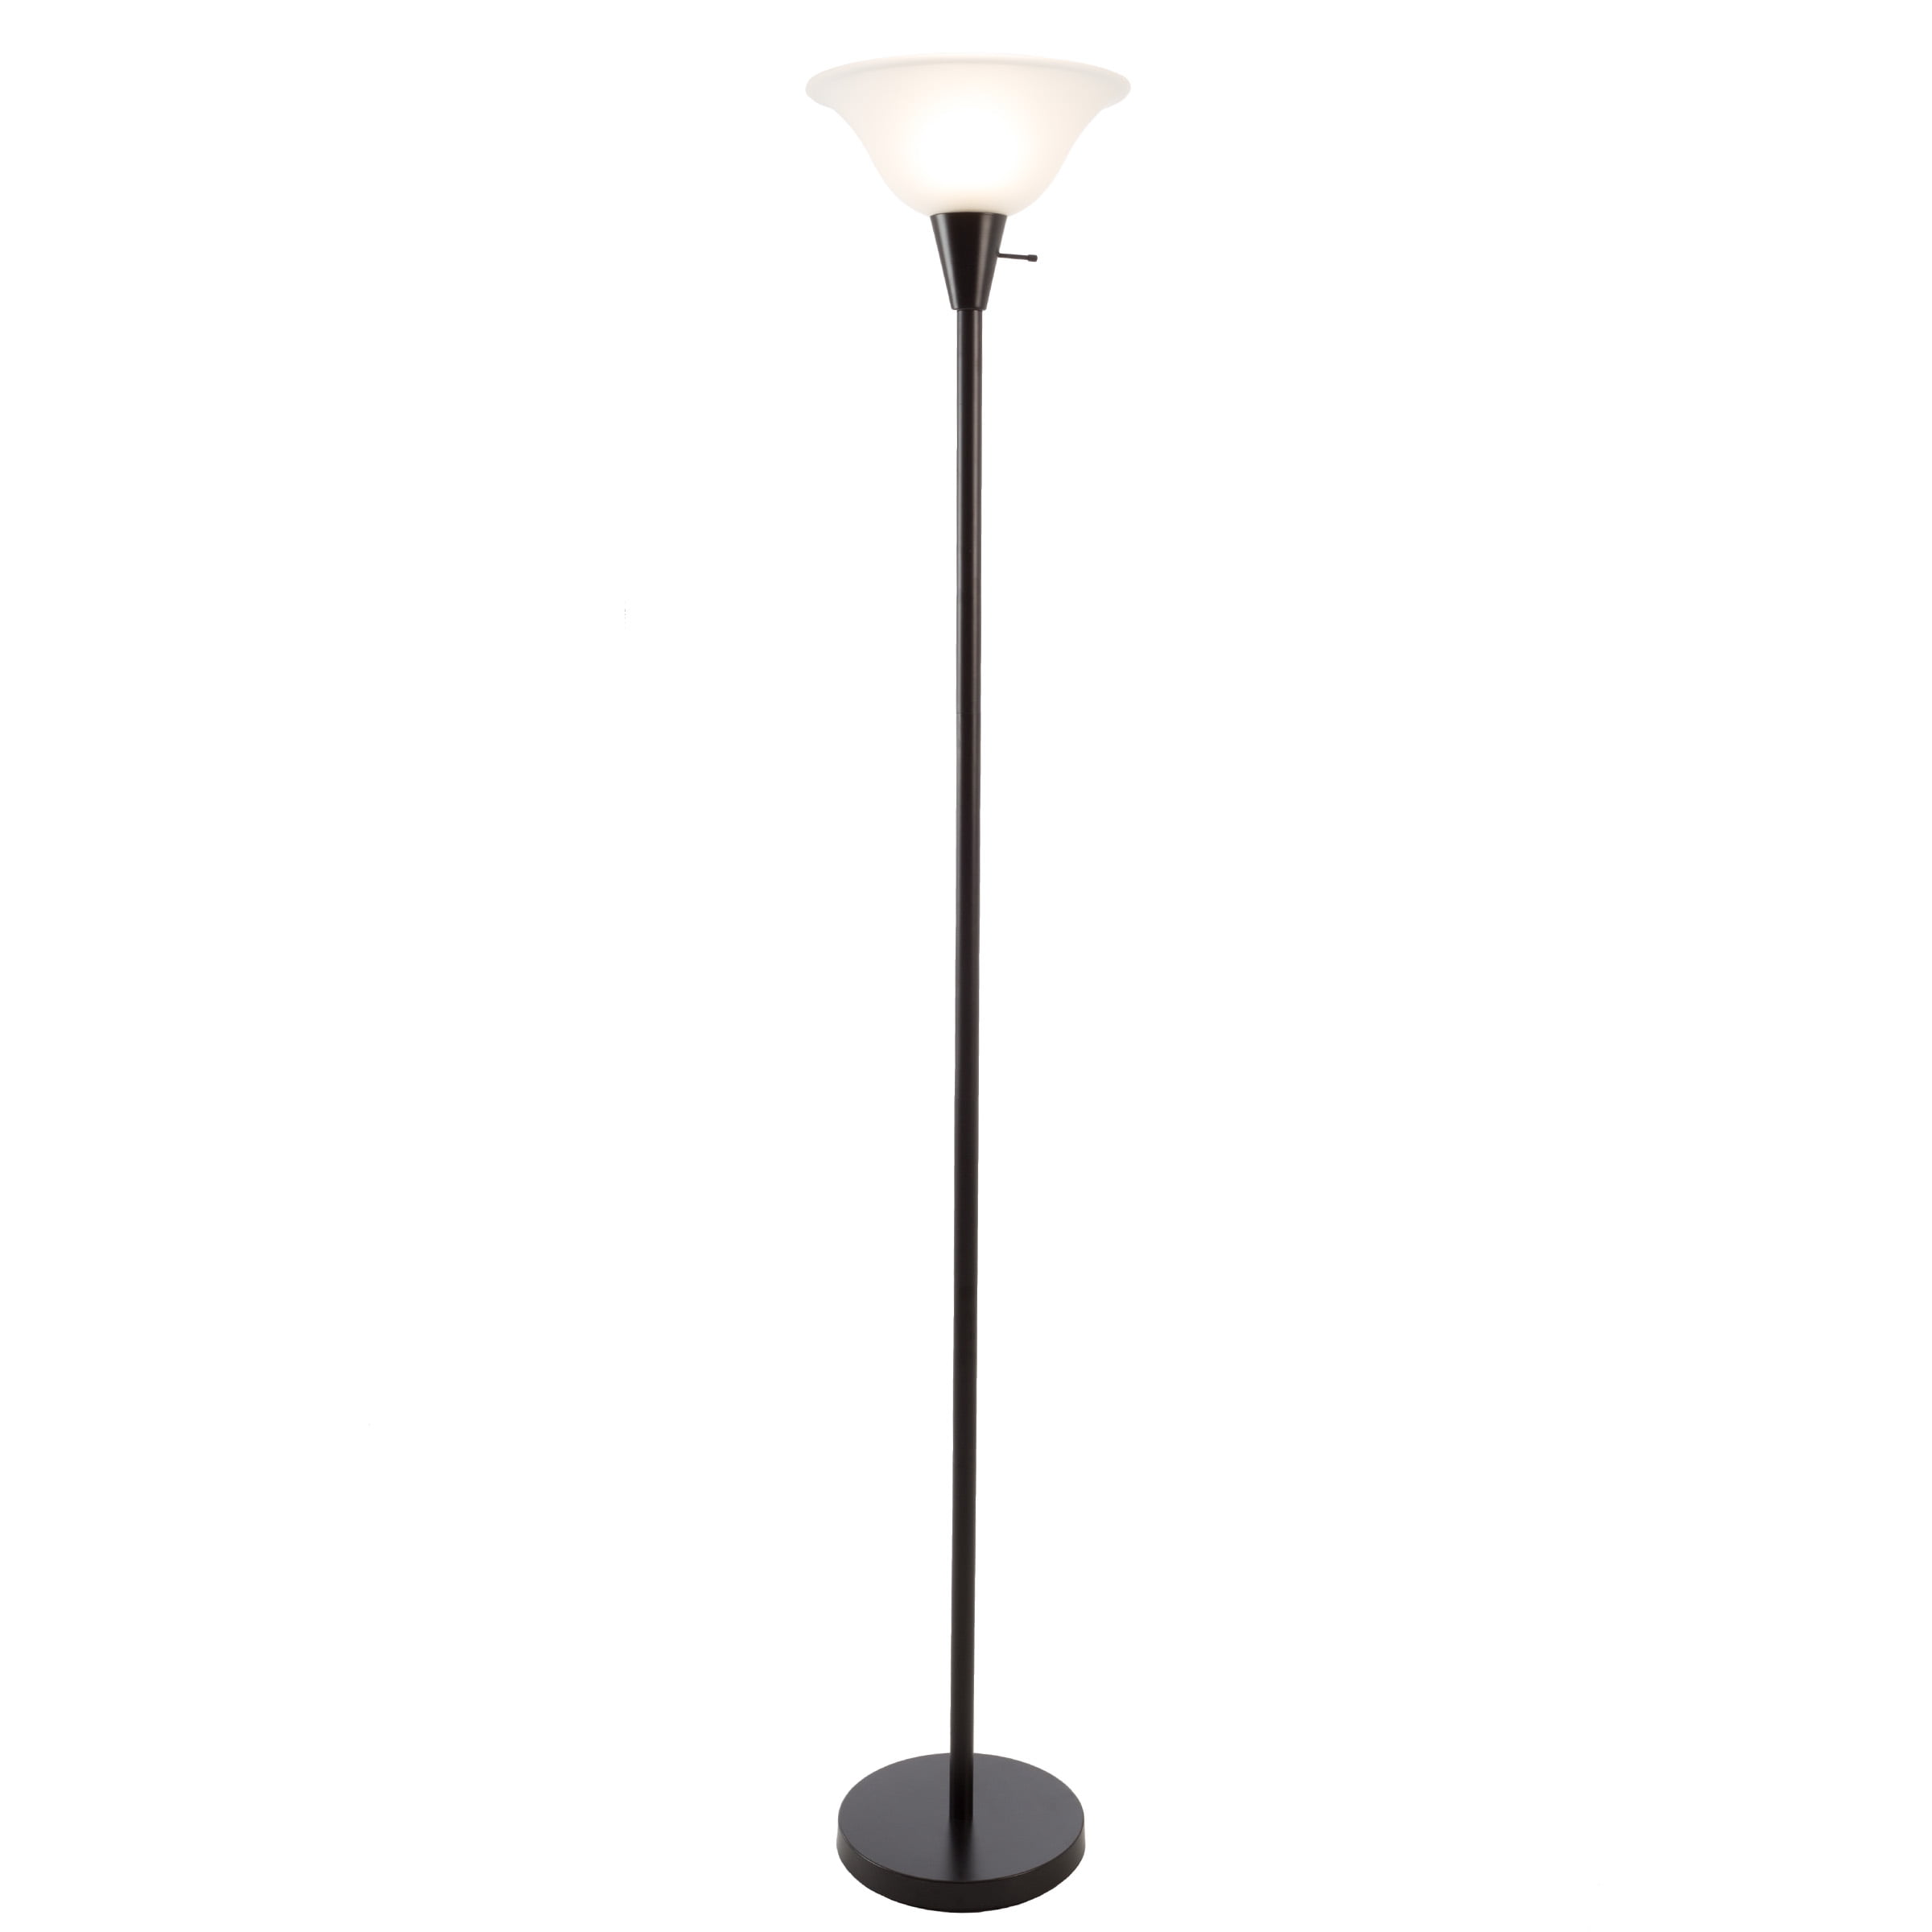 Led Floor Lamp Standing Pole Room Torch Light Energy Saving Adjustable Dimmable 